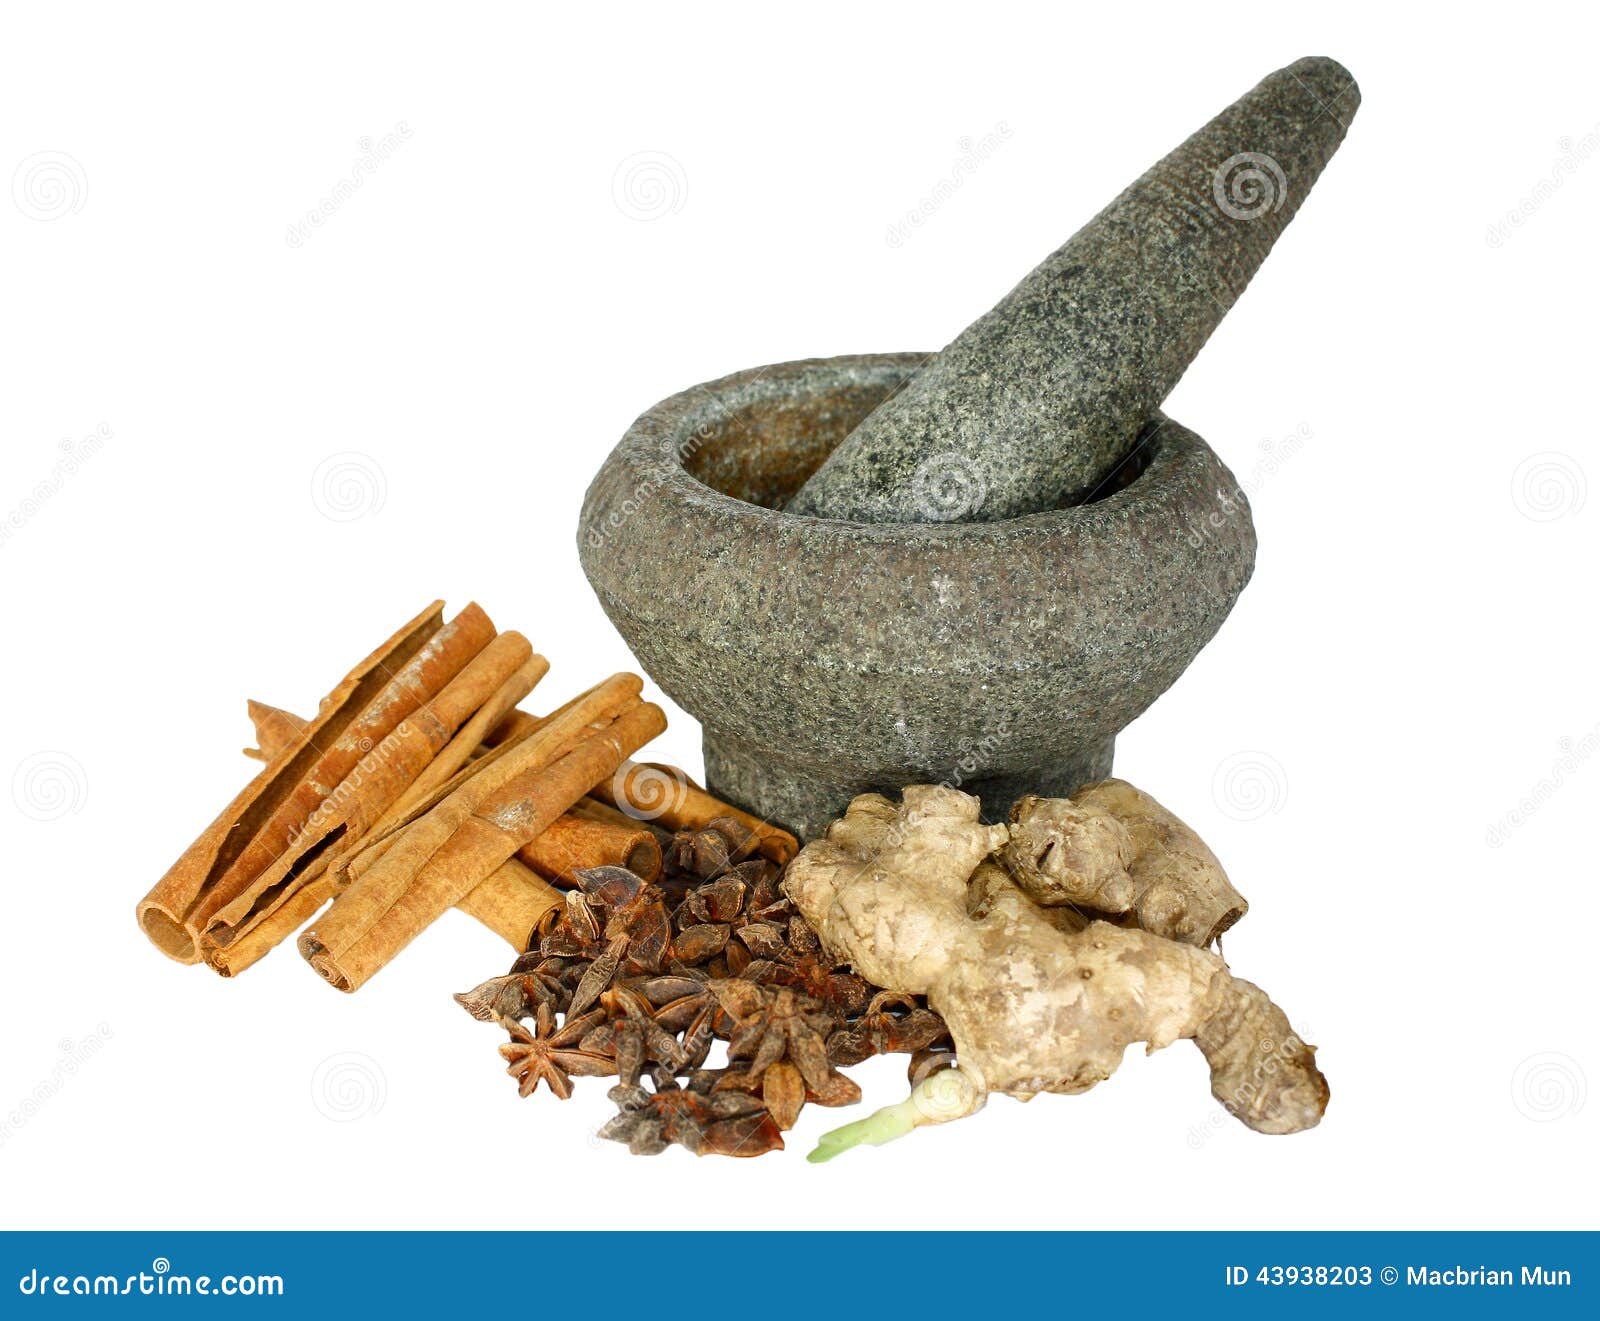 ginger, cinnamon and star anise with stone pounder